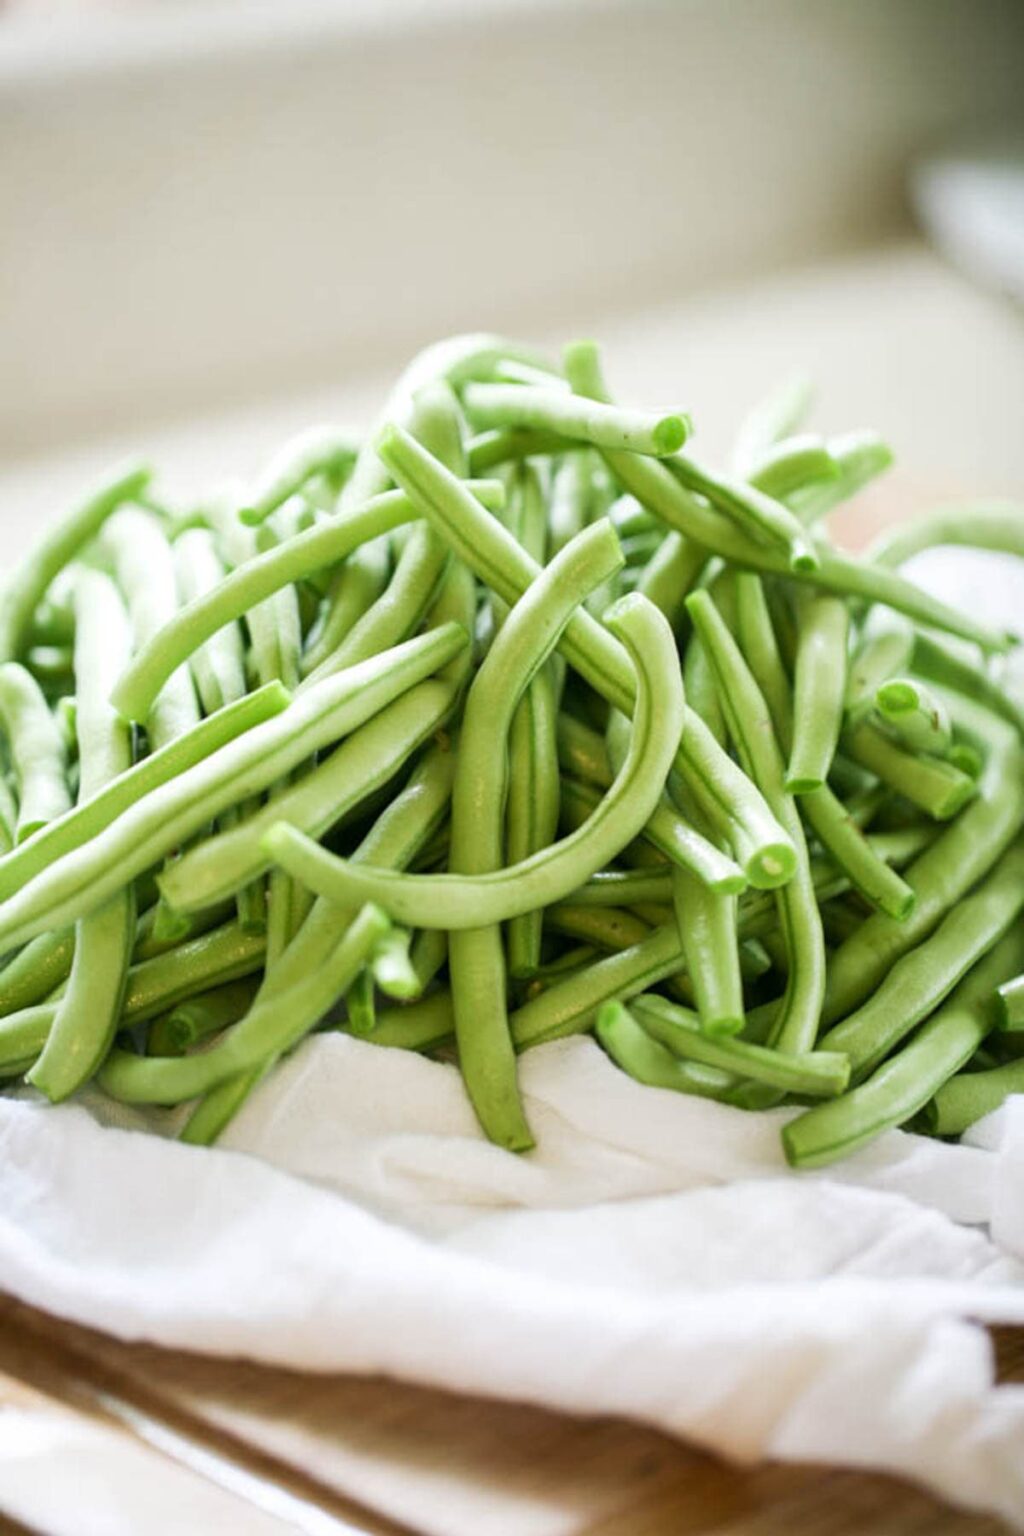 Lacto-Fermented Green Beans | Lady Lee's Home How Many Cans Is 4 Cups Of Green Beans